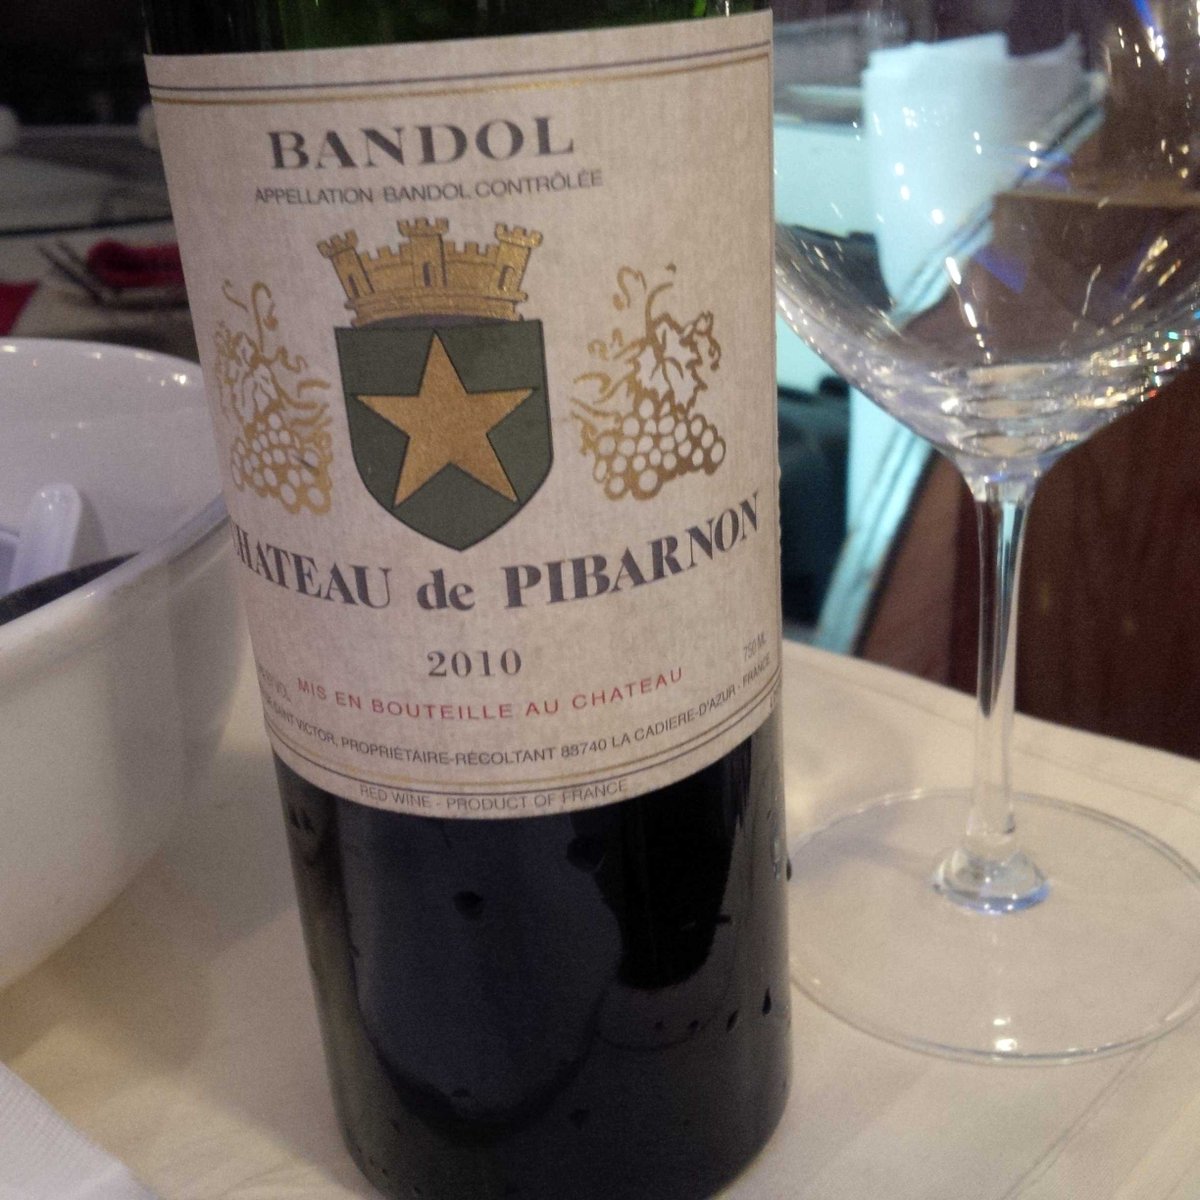 NO surprise here @ChateaudePibarnon 10 #Bandol,deep as a Monless night,peppery,herbs,currants,ripe,tannic,flavorful.